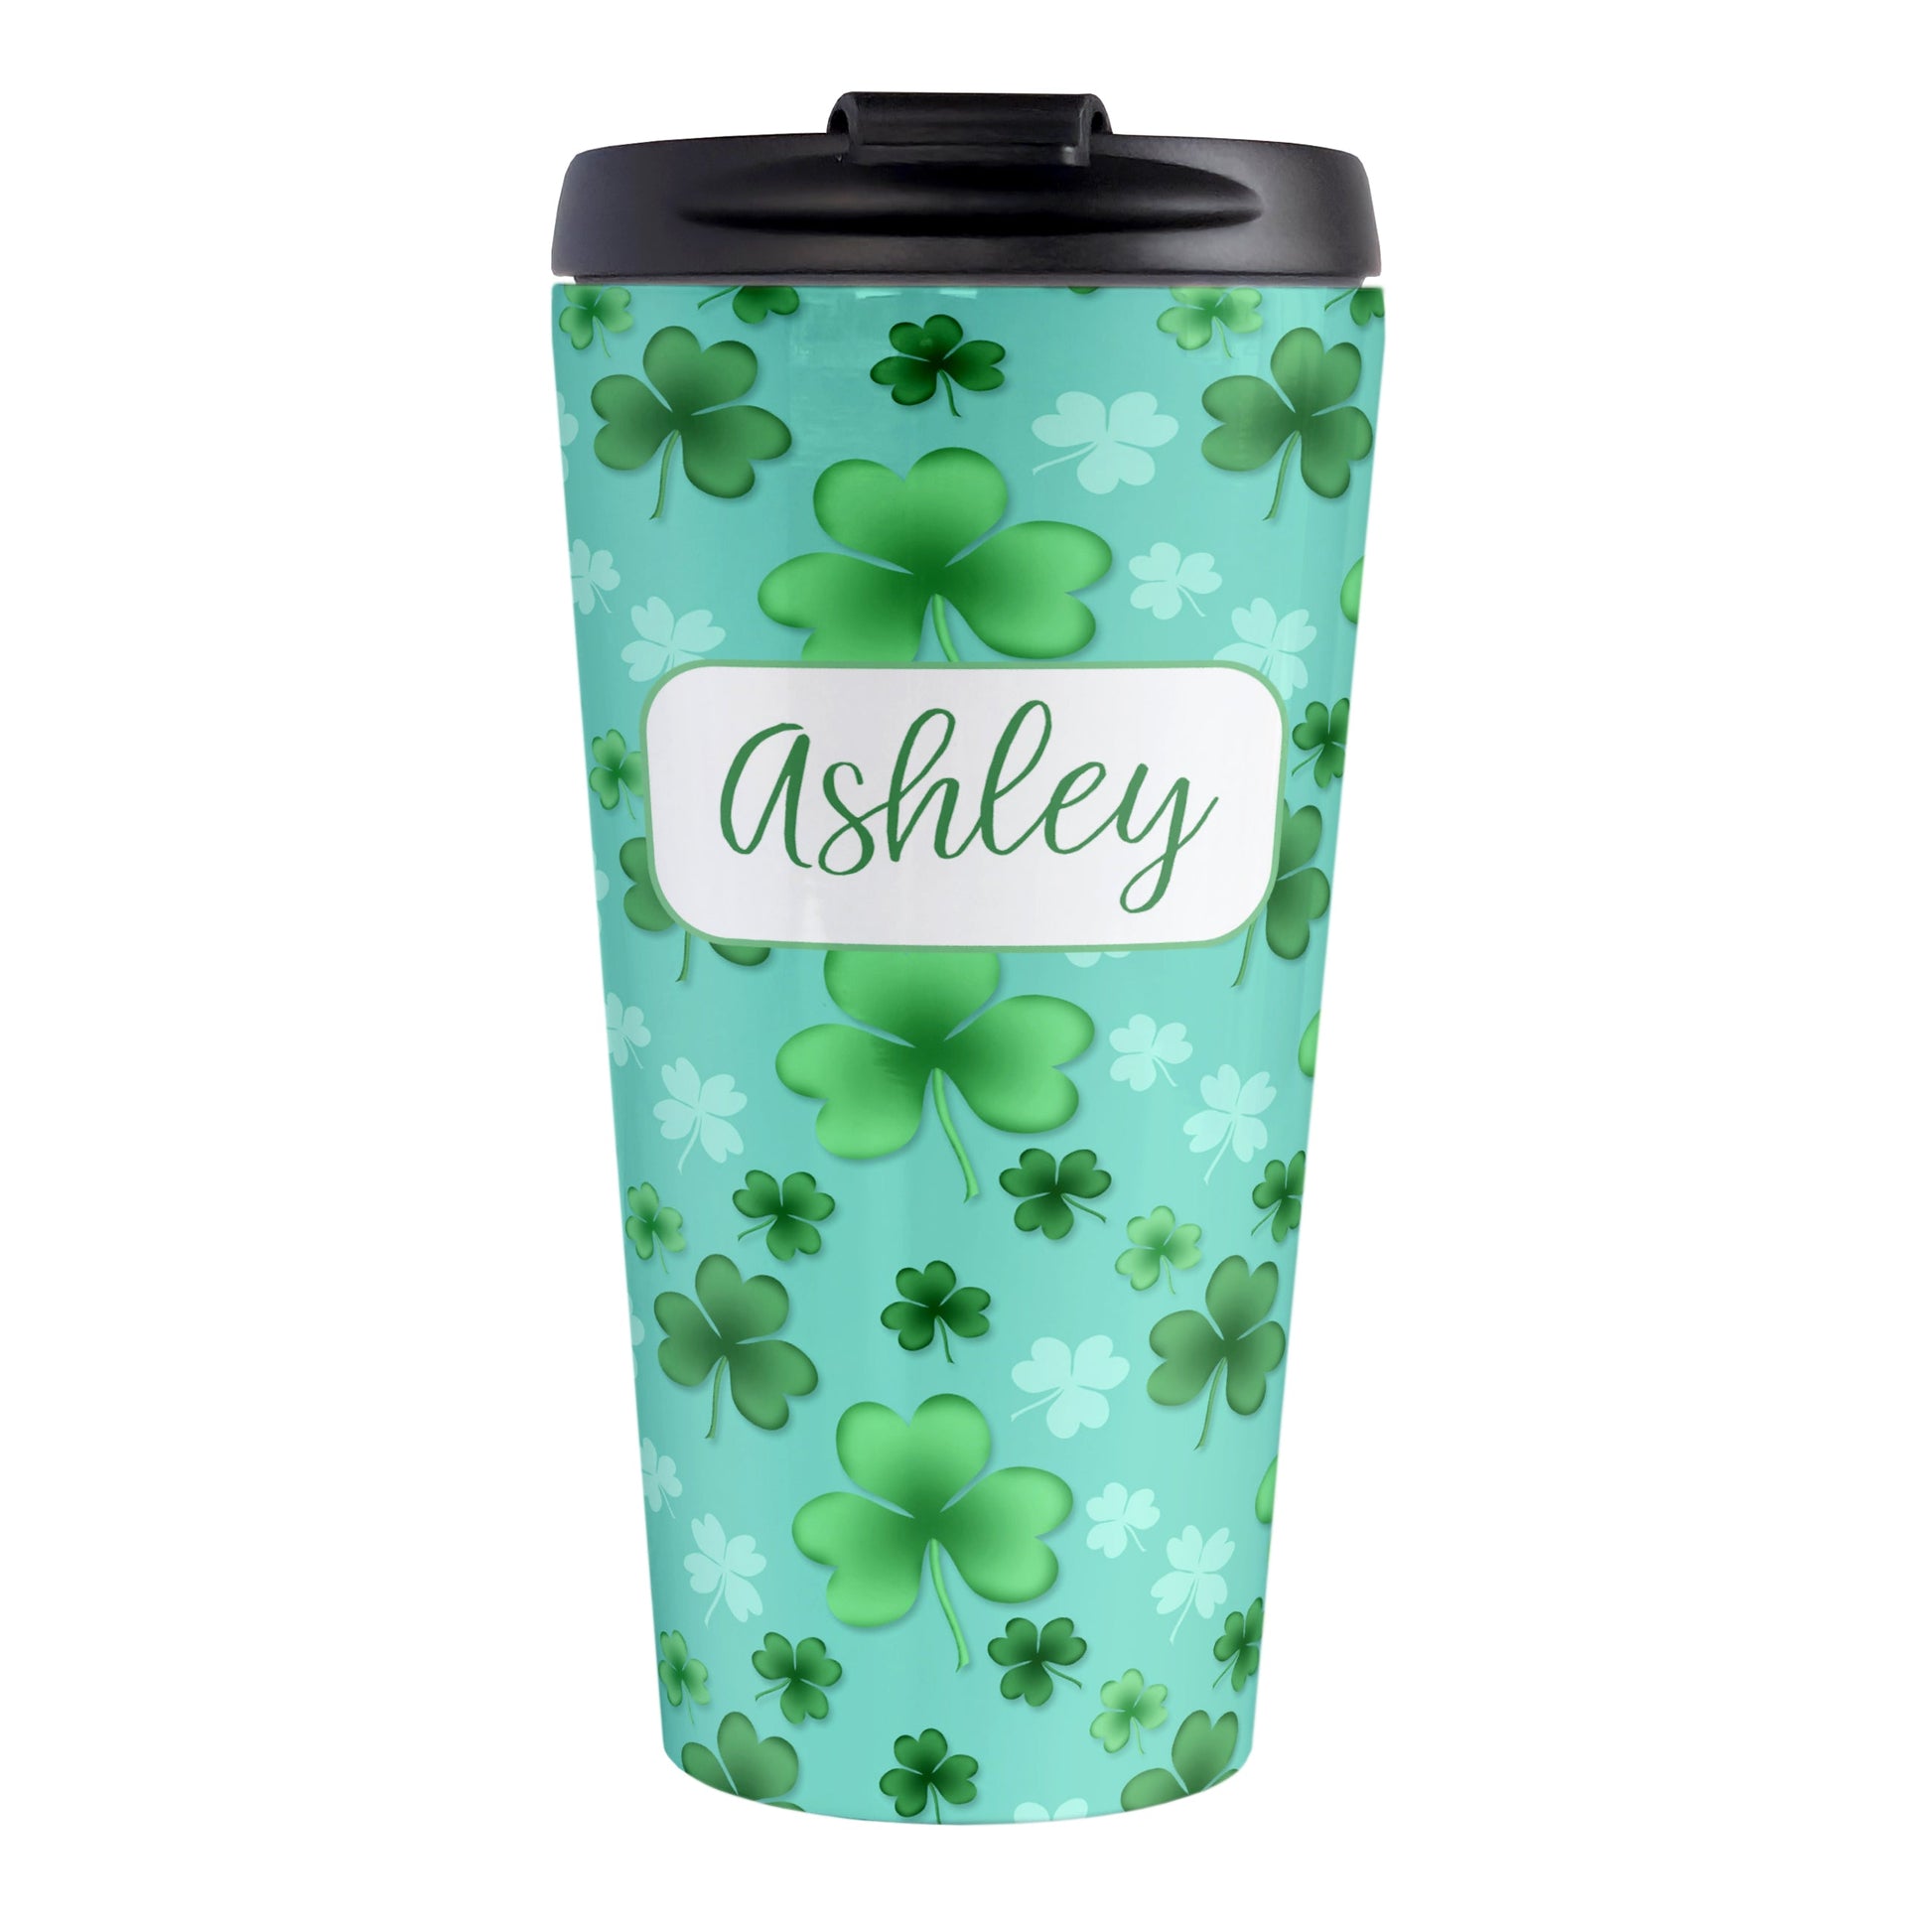 Personalized Lucky Clover Pattern Teal and Green Travel Mug (15oz, stainless steel insulated) at Amy's Coffee Mugs. A travel mug designed with a lucky green clover pattern with a 4-leaf clover among 3-leaf clovers, in different shades of green, over a teal background that wraps around the mug. Your name is personalized in green on white, over the lucky clover pattern.